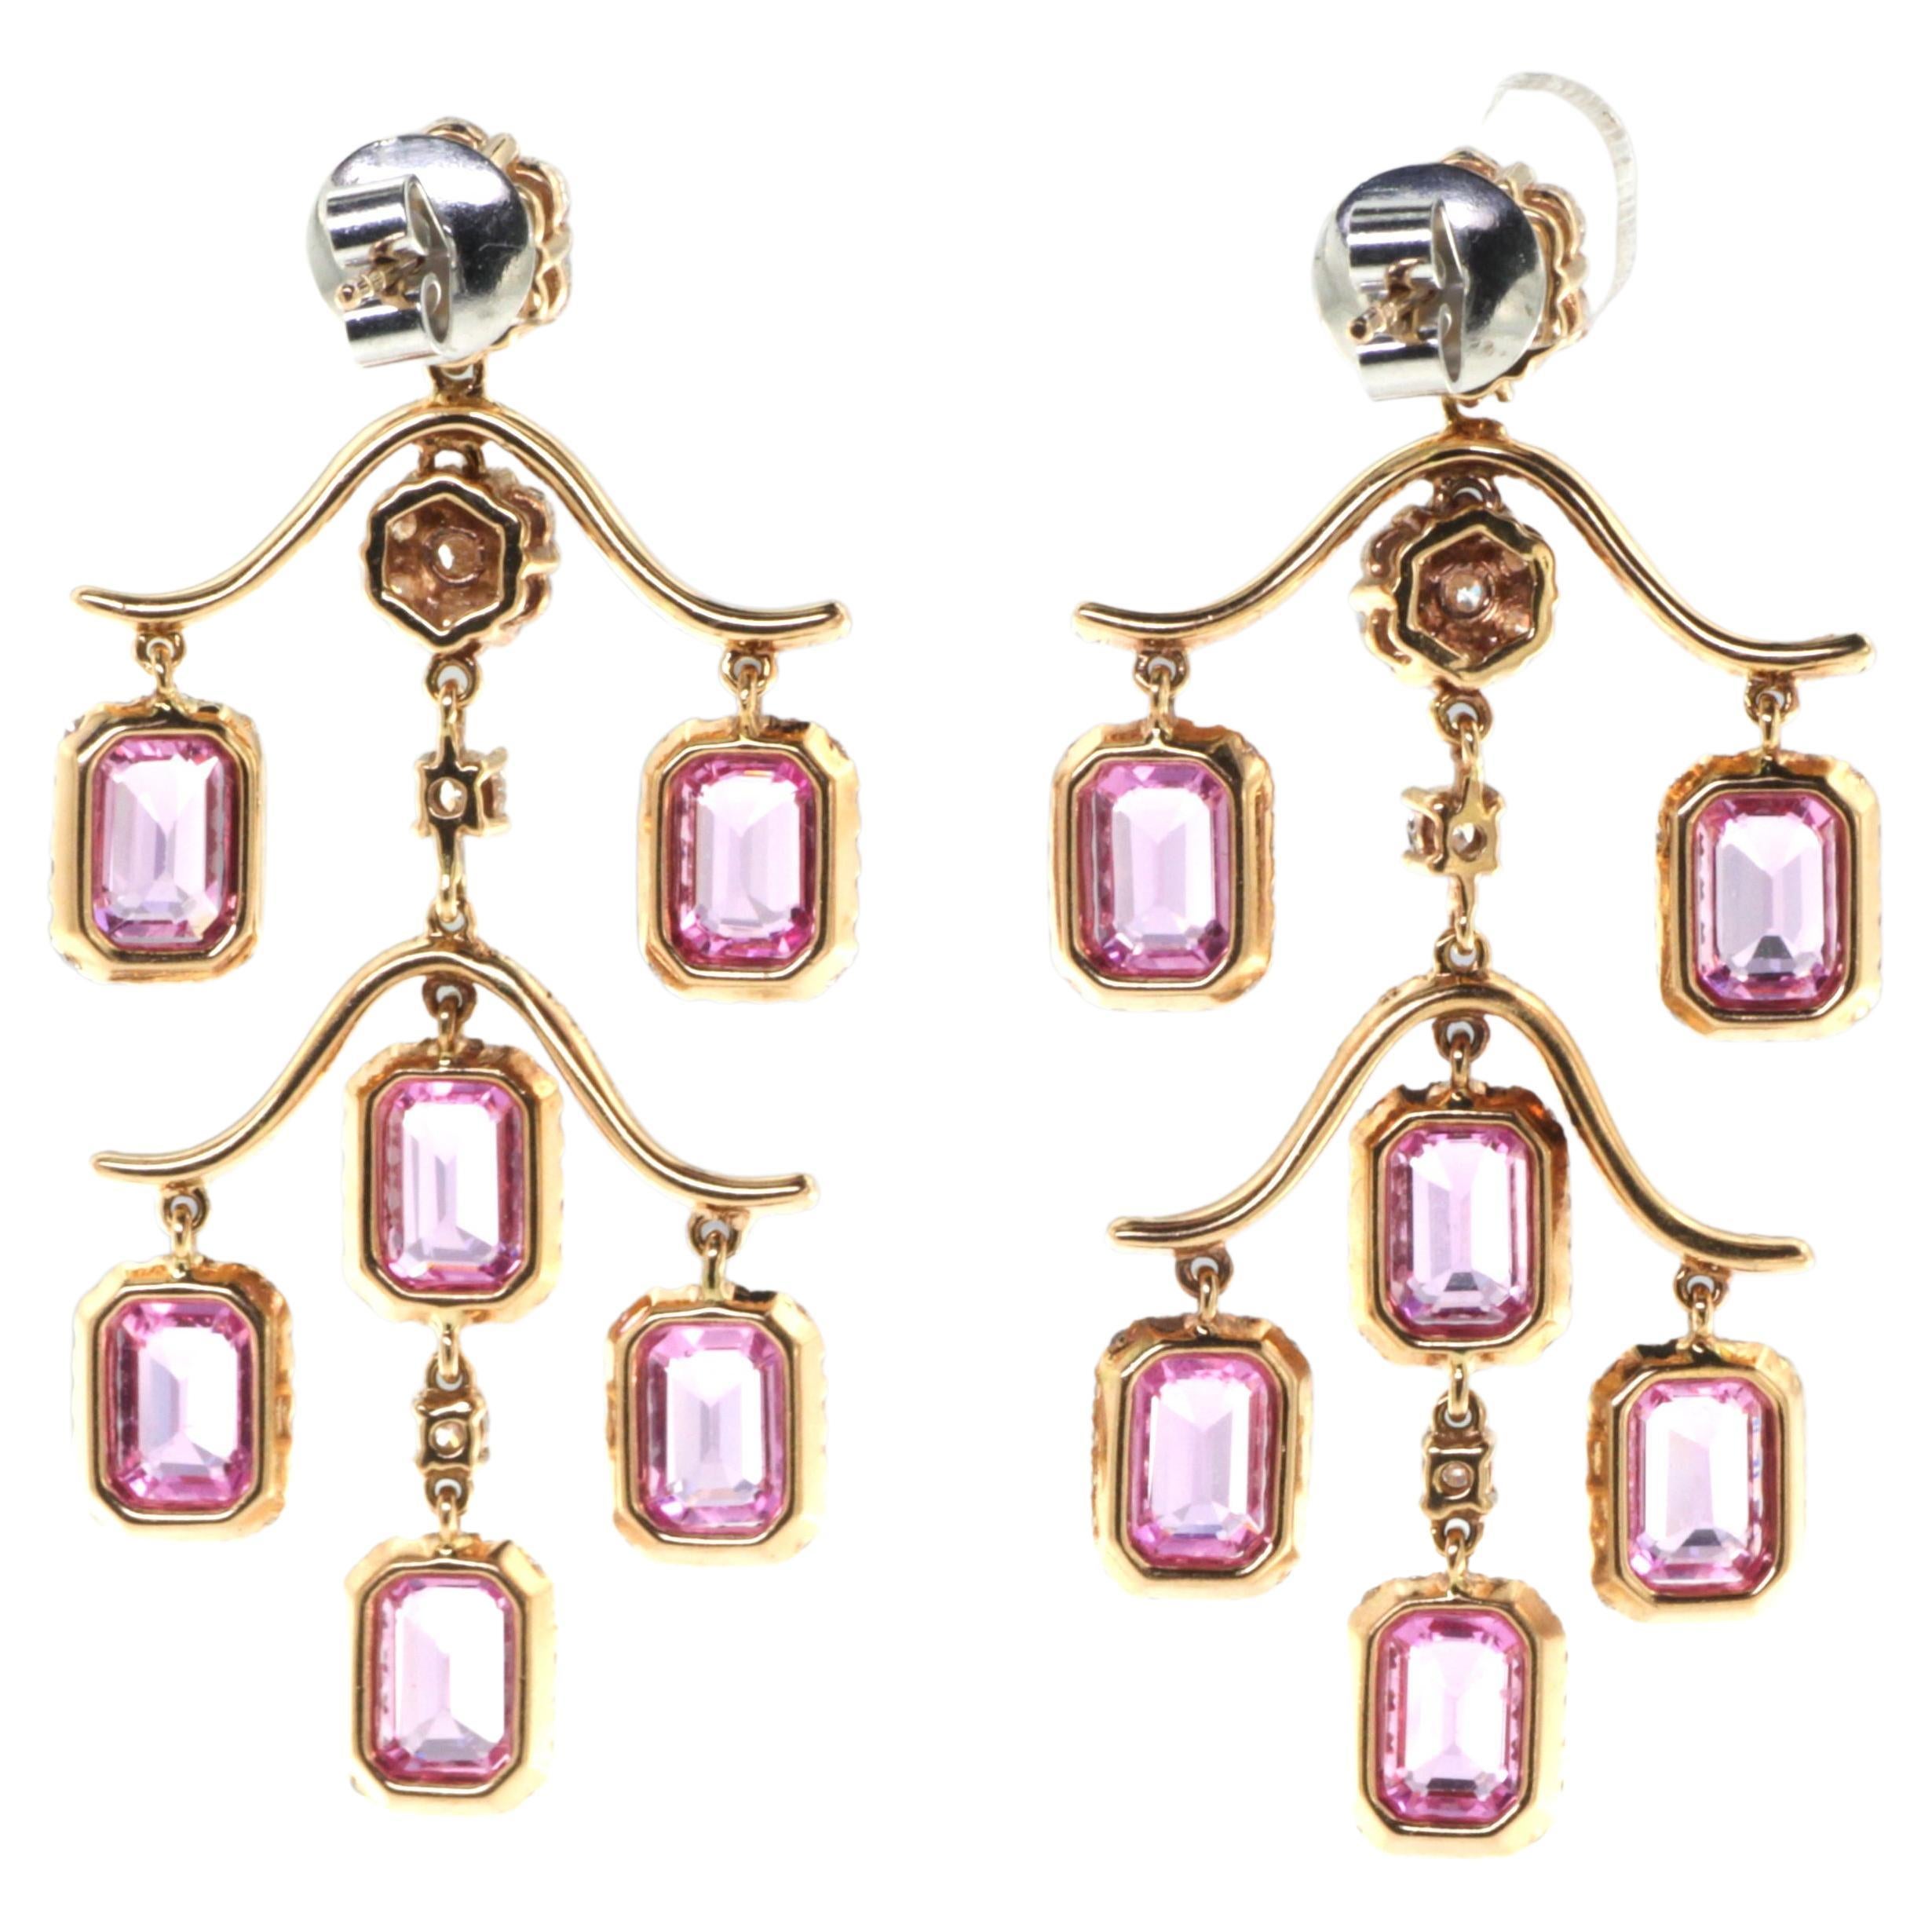 The 7.38-carat Pink Sapphire Diamonds Chandelier Earrings exude elegance and luxury. Crafted meticulously in 18-karat rose gold, they showcase a masterful blend of design and craftsmanship. The radiant pink sapphires, totaling 7.38 carats, are the